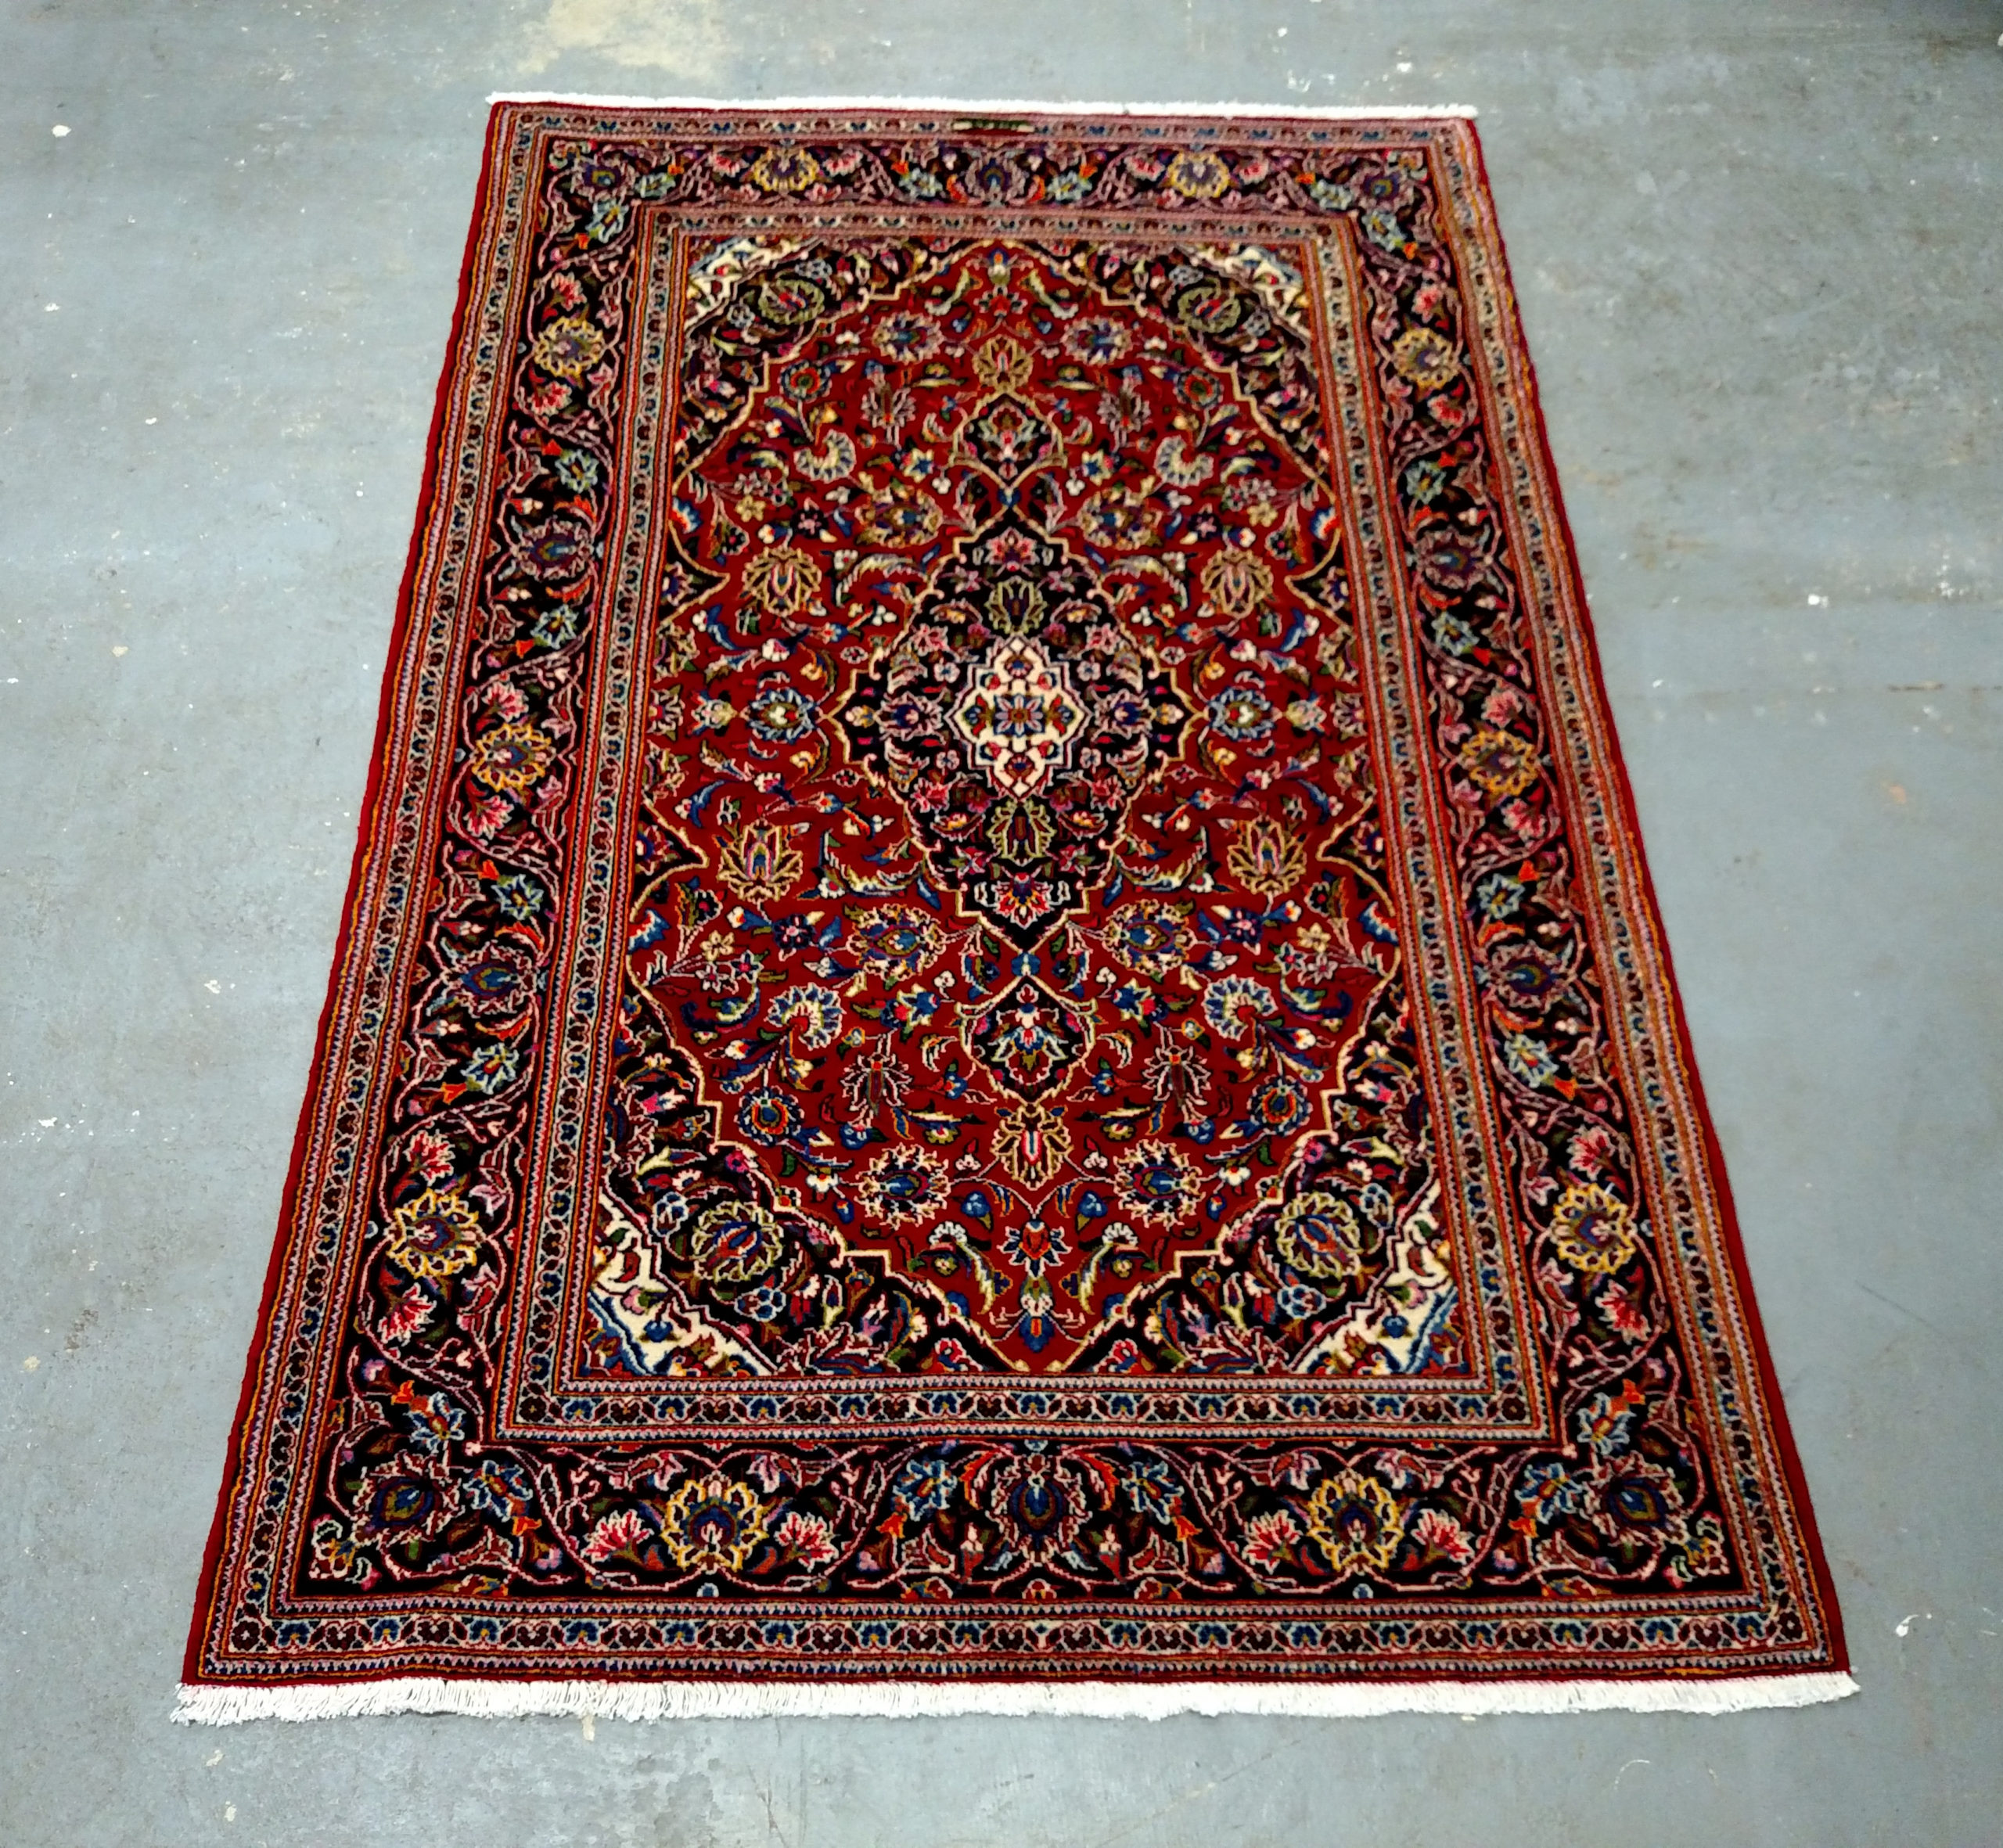 Red Kashan Persian Rug, 4'4" x 6'8", Ready for your Living Room!